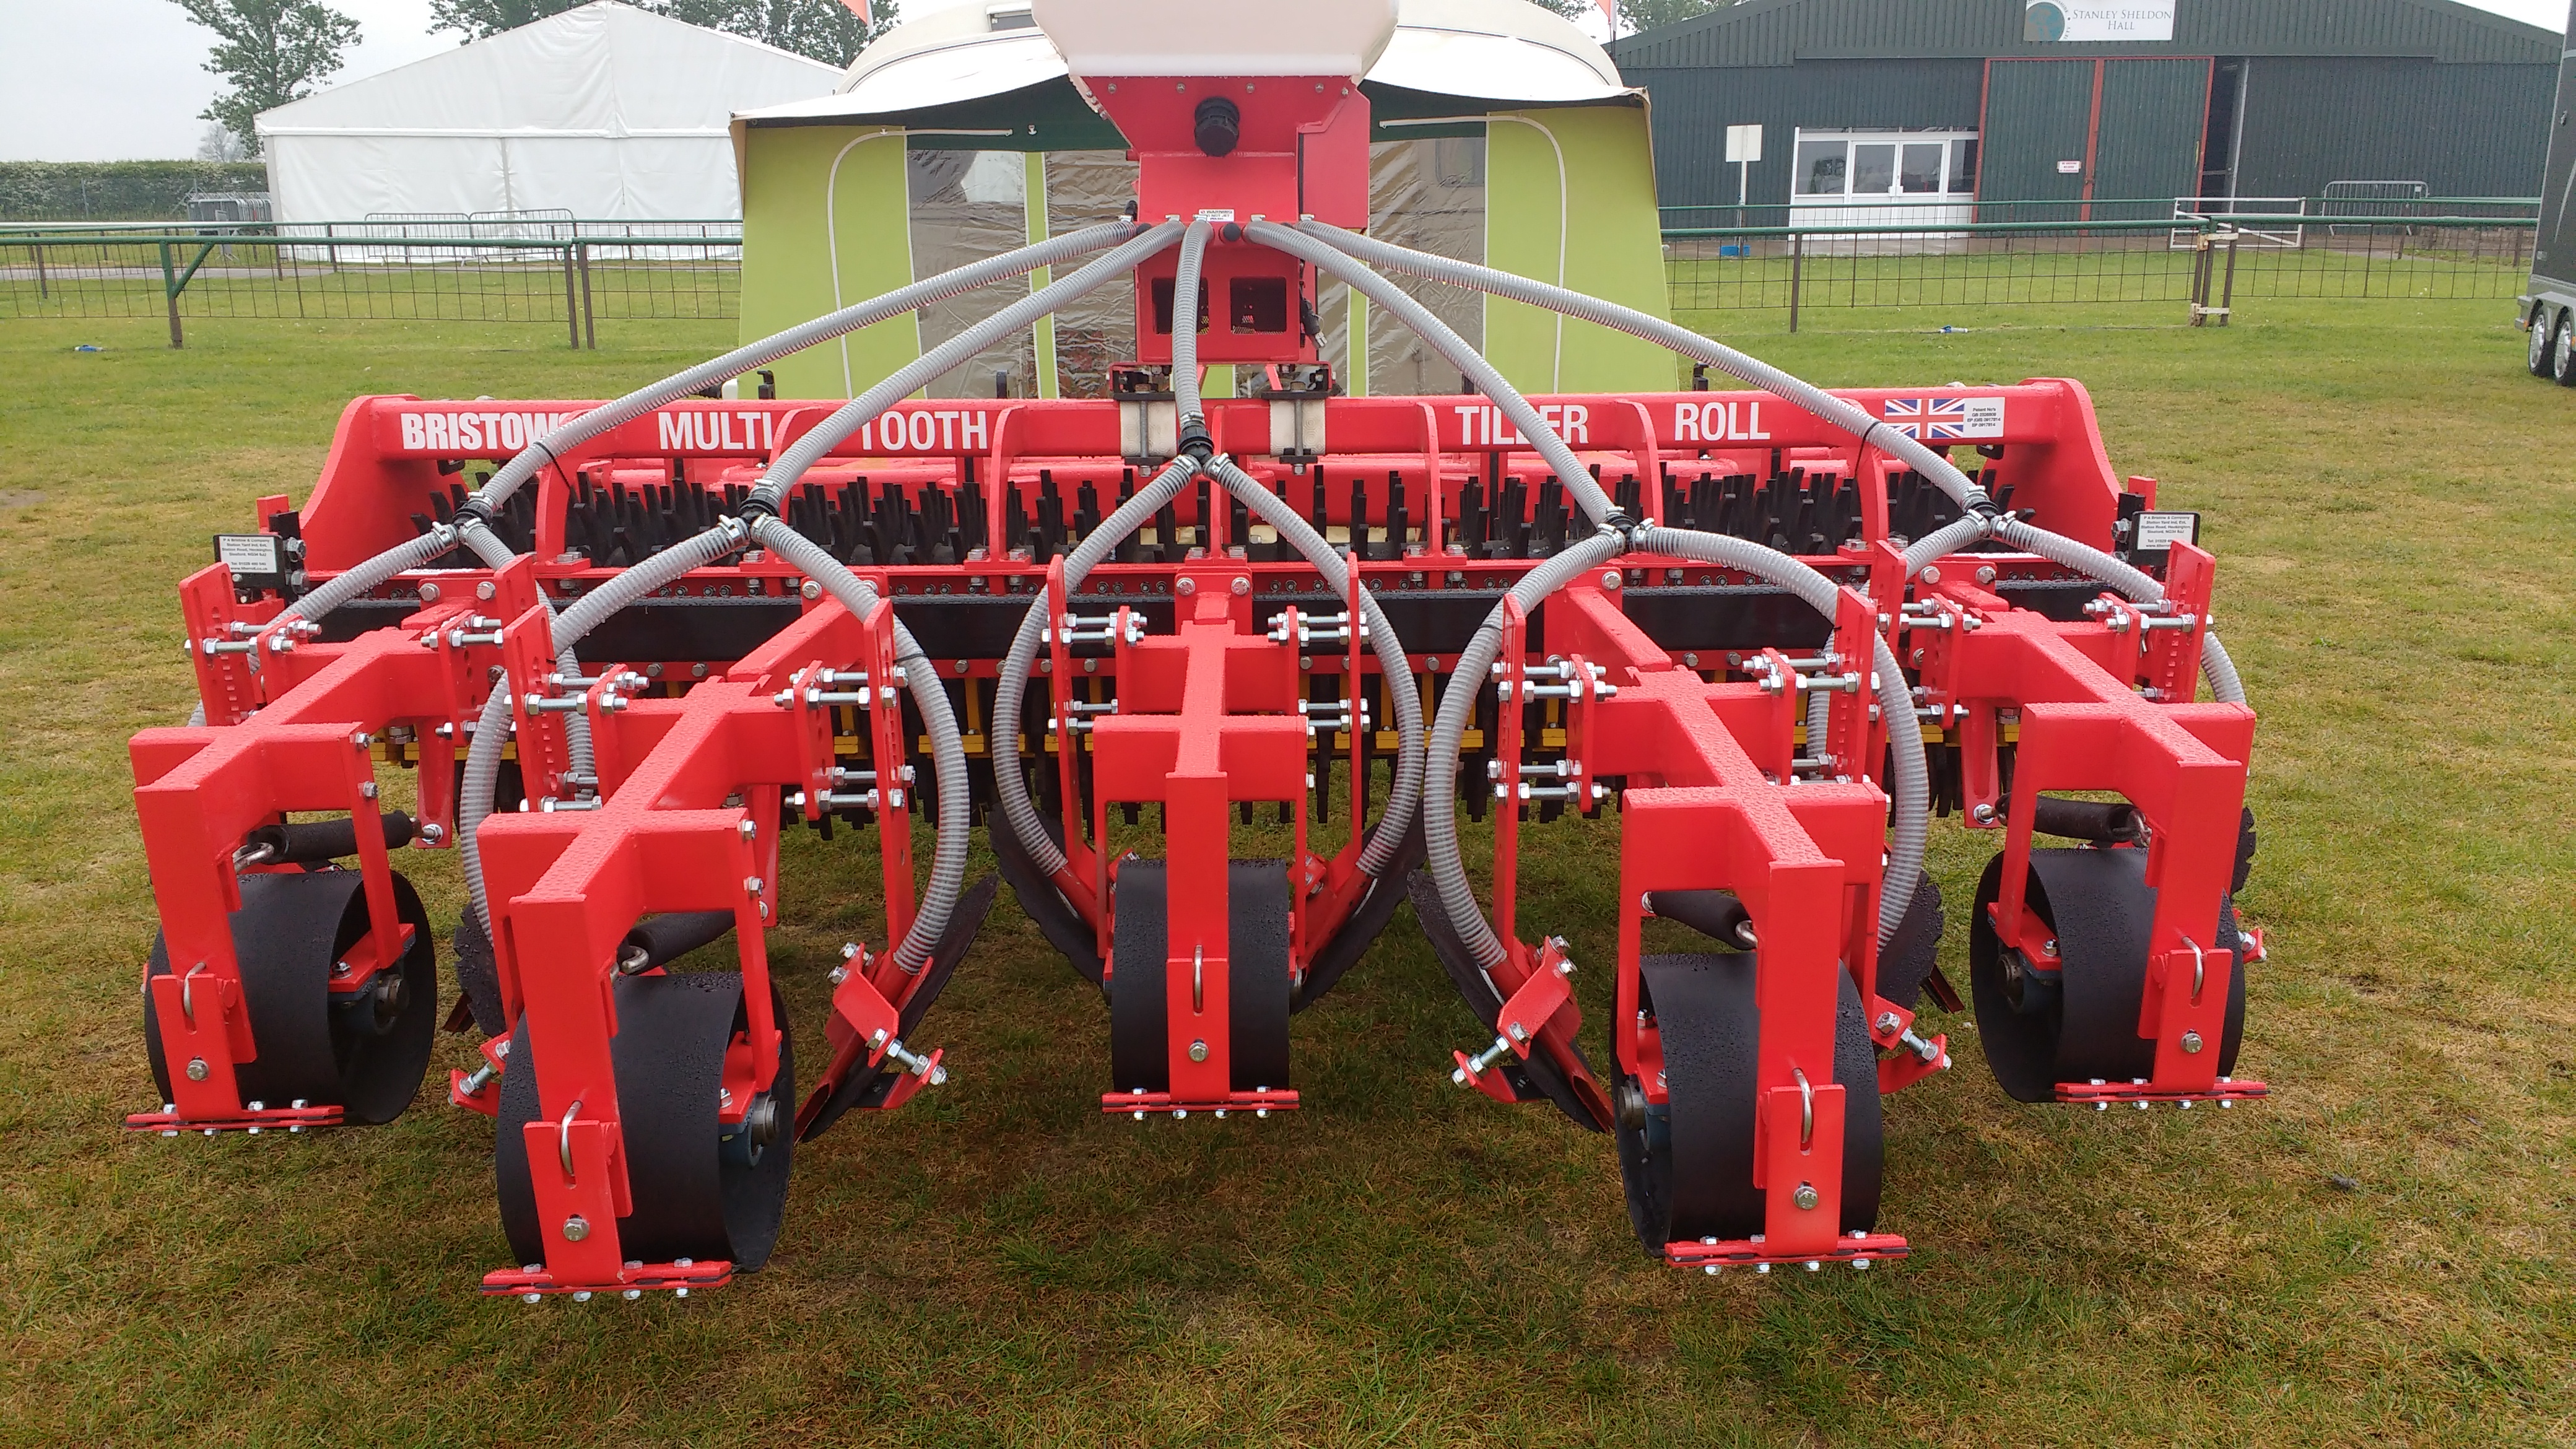 NEW Bristow's Angled Disc Seed Drill